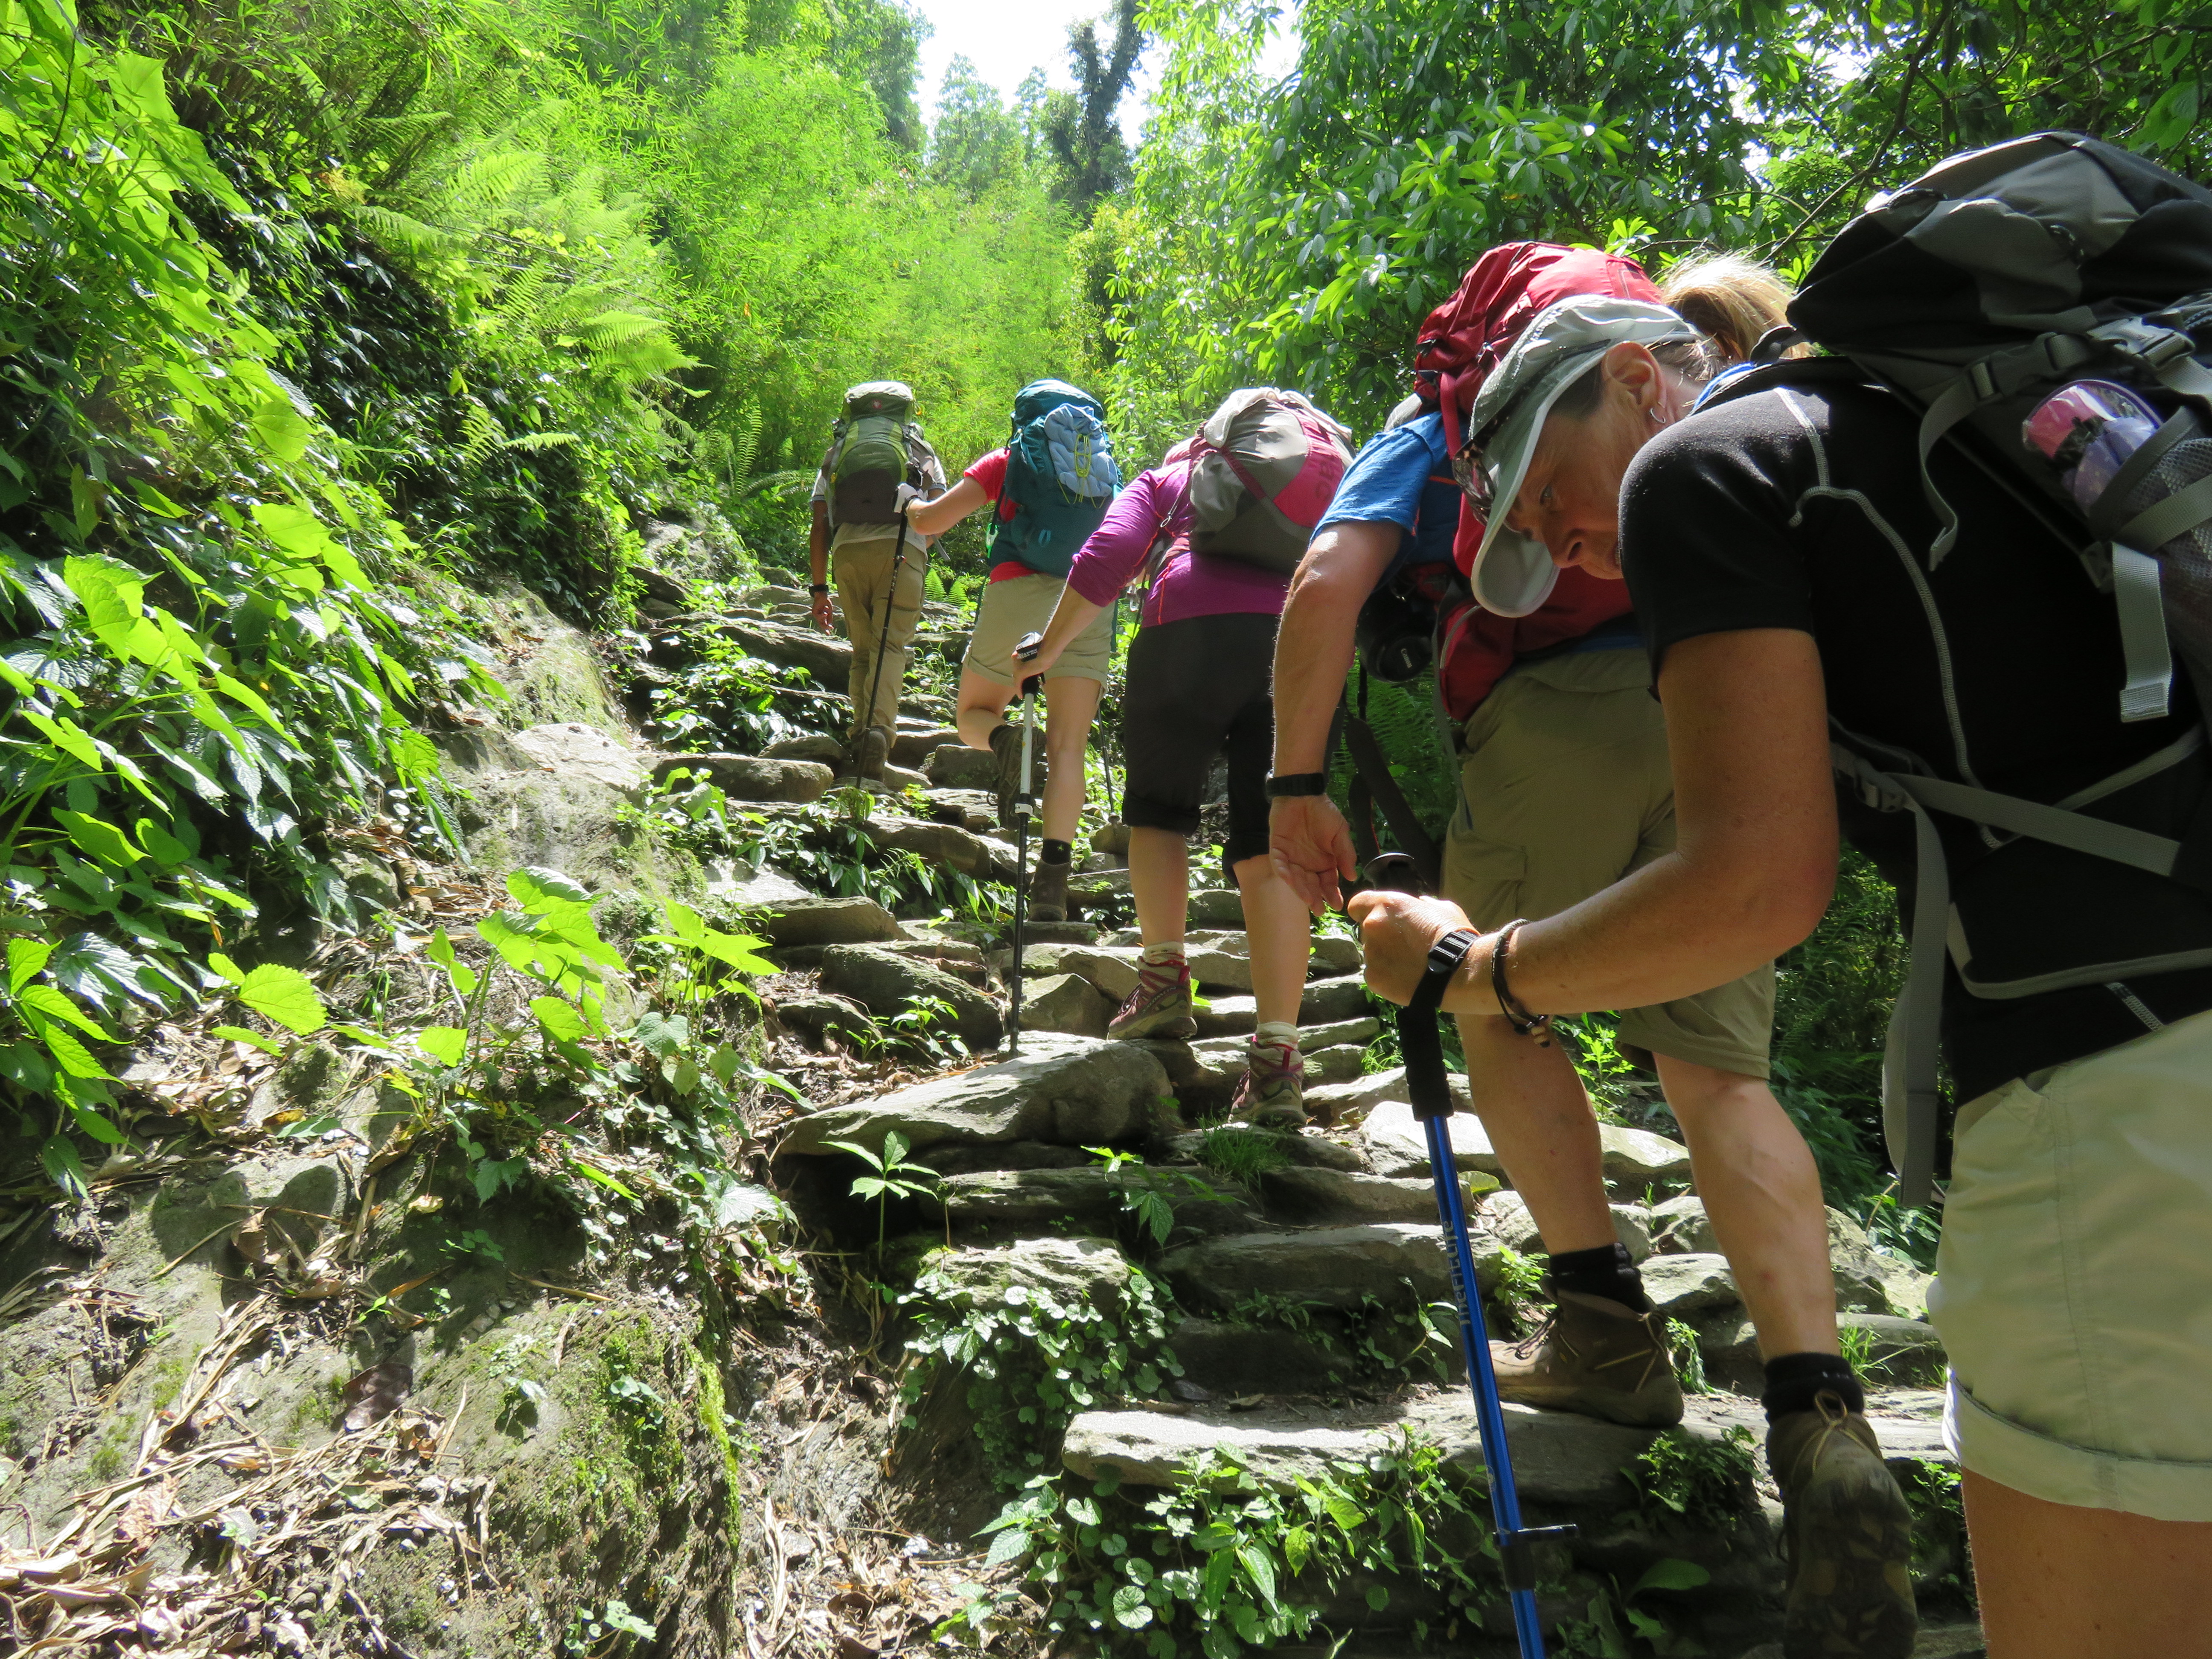 Staircase hiking in the Annapurna region